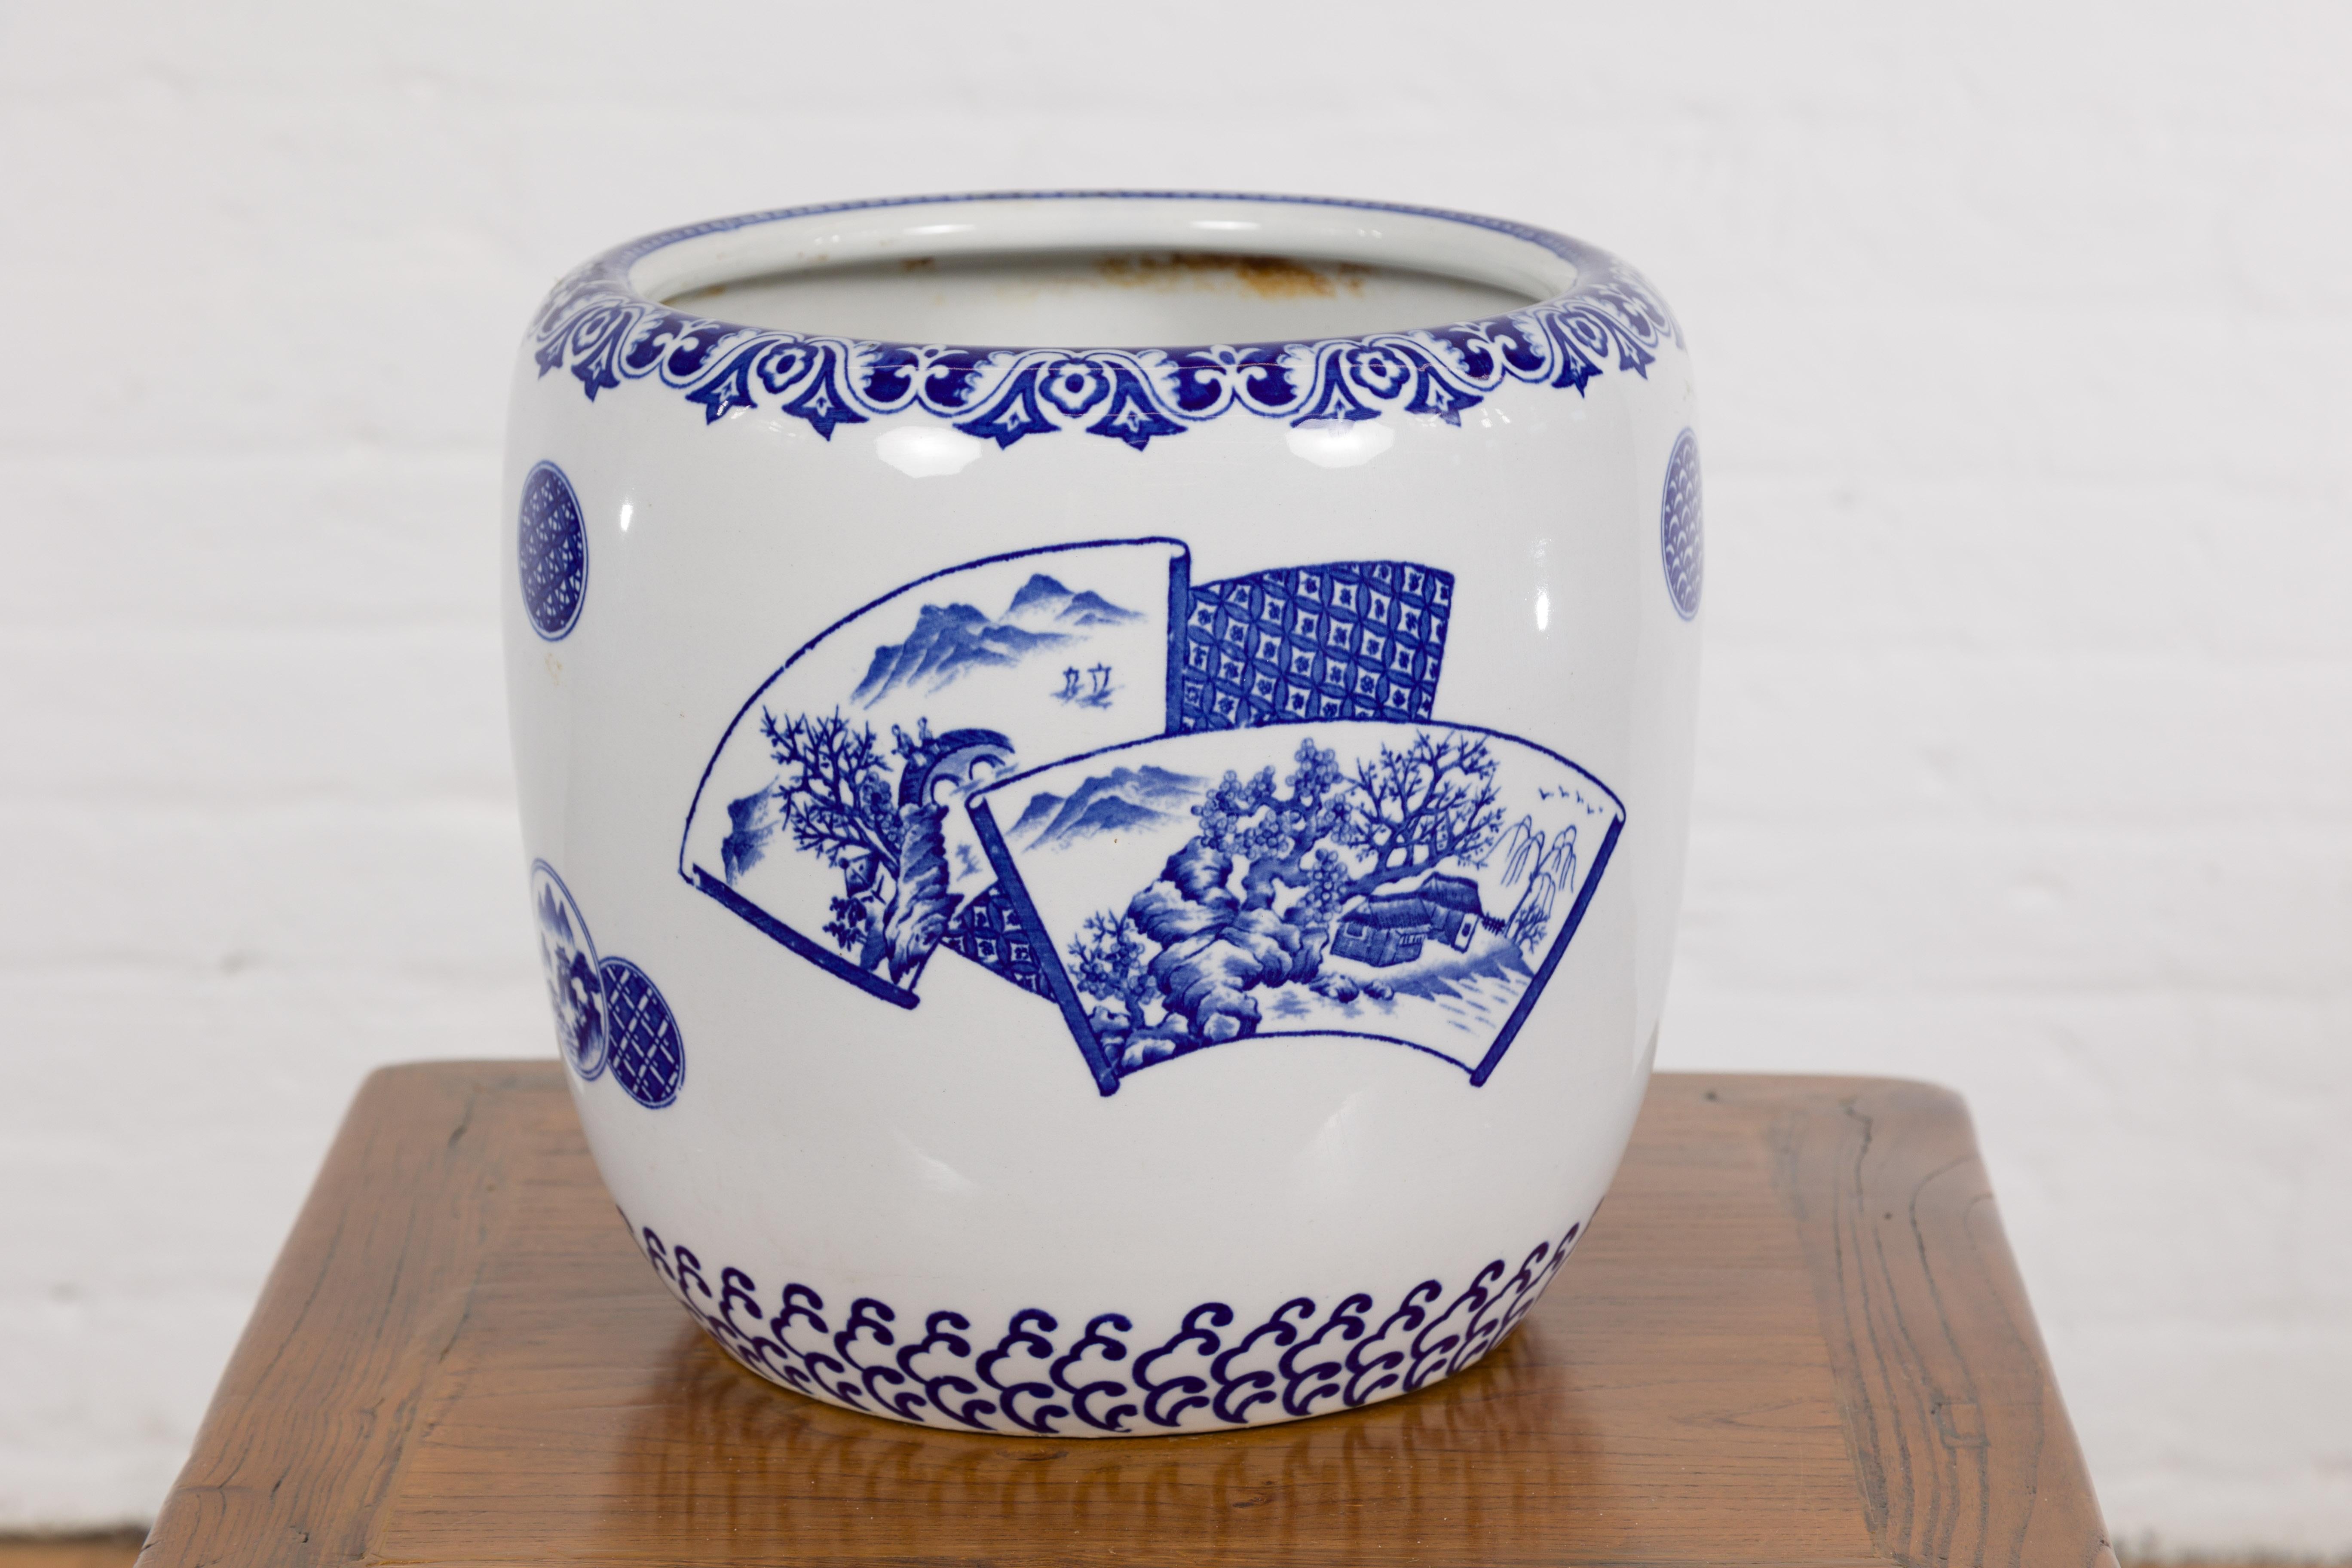 A vintage Chinese blue and white porcelain planter with hand-painted landscape design. Gracefully encapsulating the serene beauty of Chinese landscapes, this vintage blue and white porcelain planter transforms any space into a peaceful haven. Its